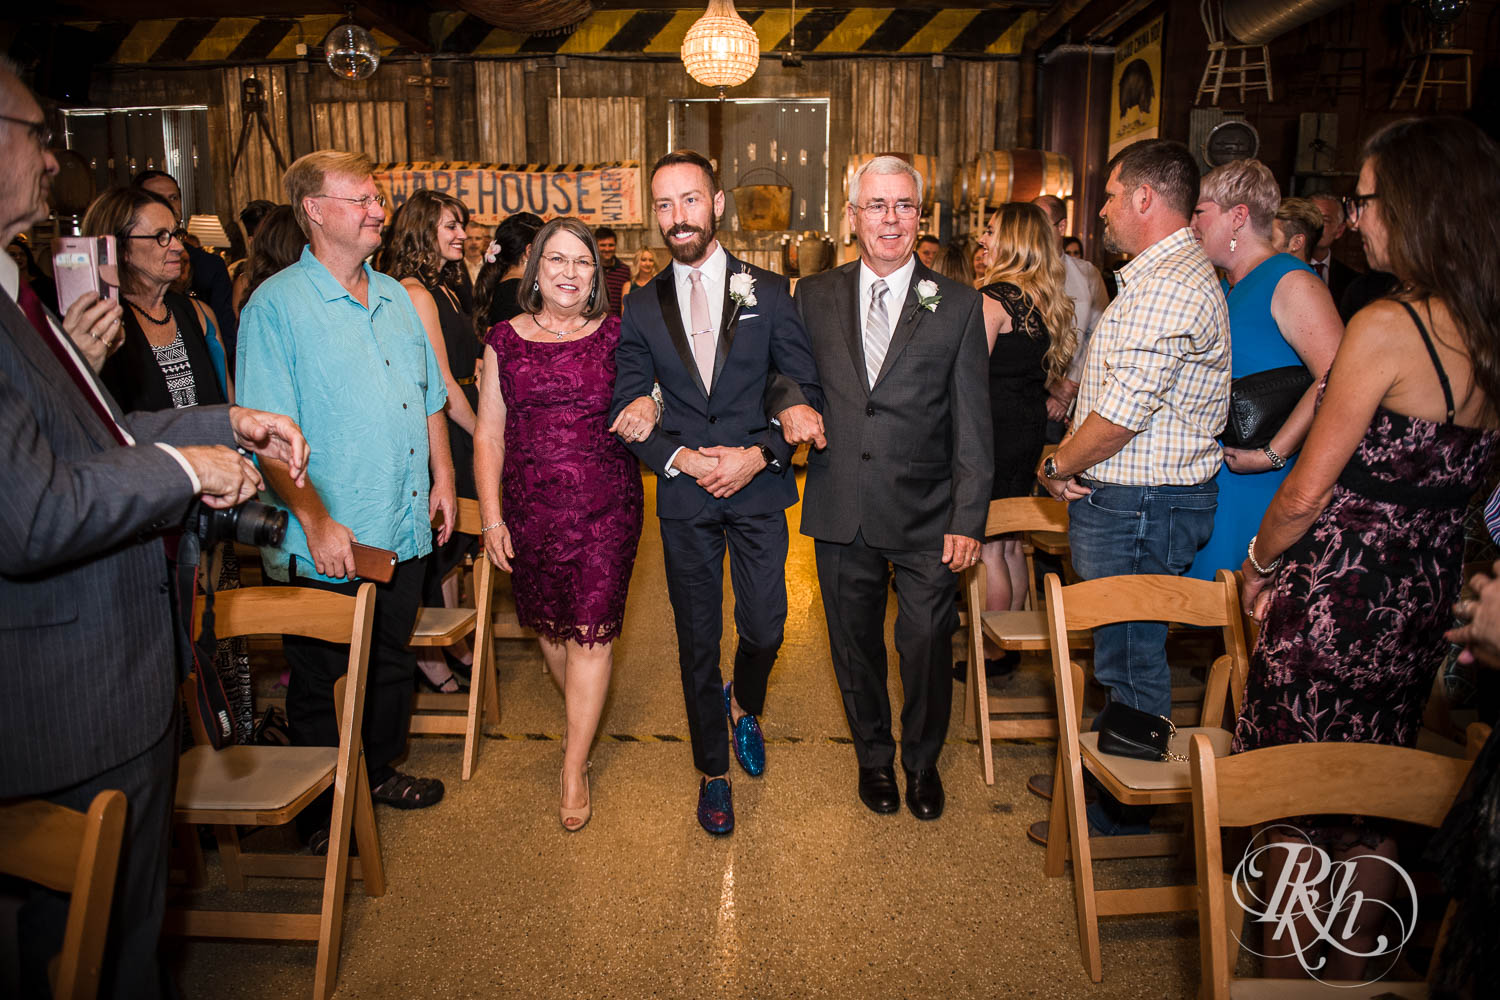 Groom walks down the aisle with parents at Warehouse Winery wedding in Saint Louis Park, Minnesota.